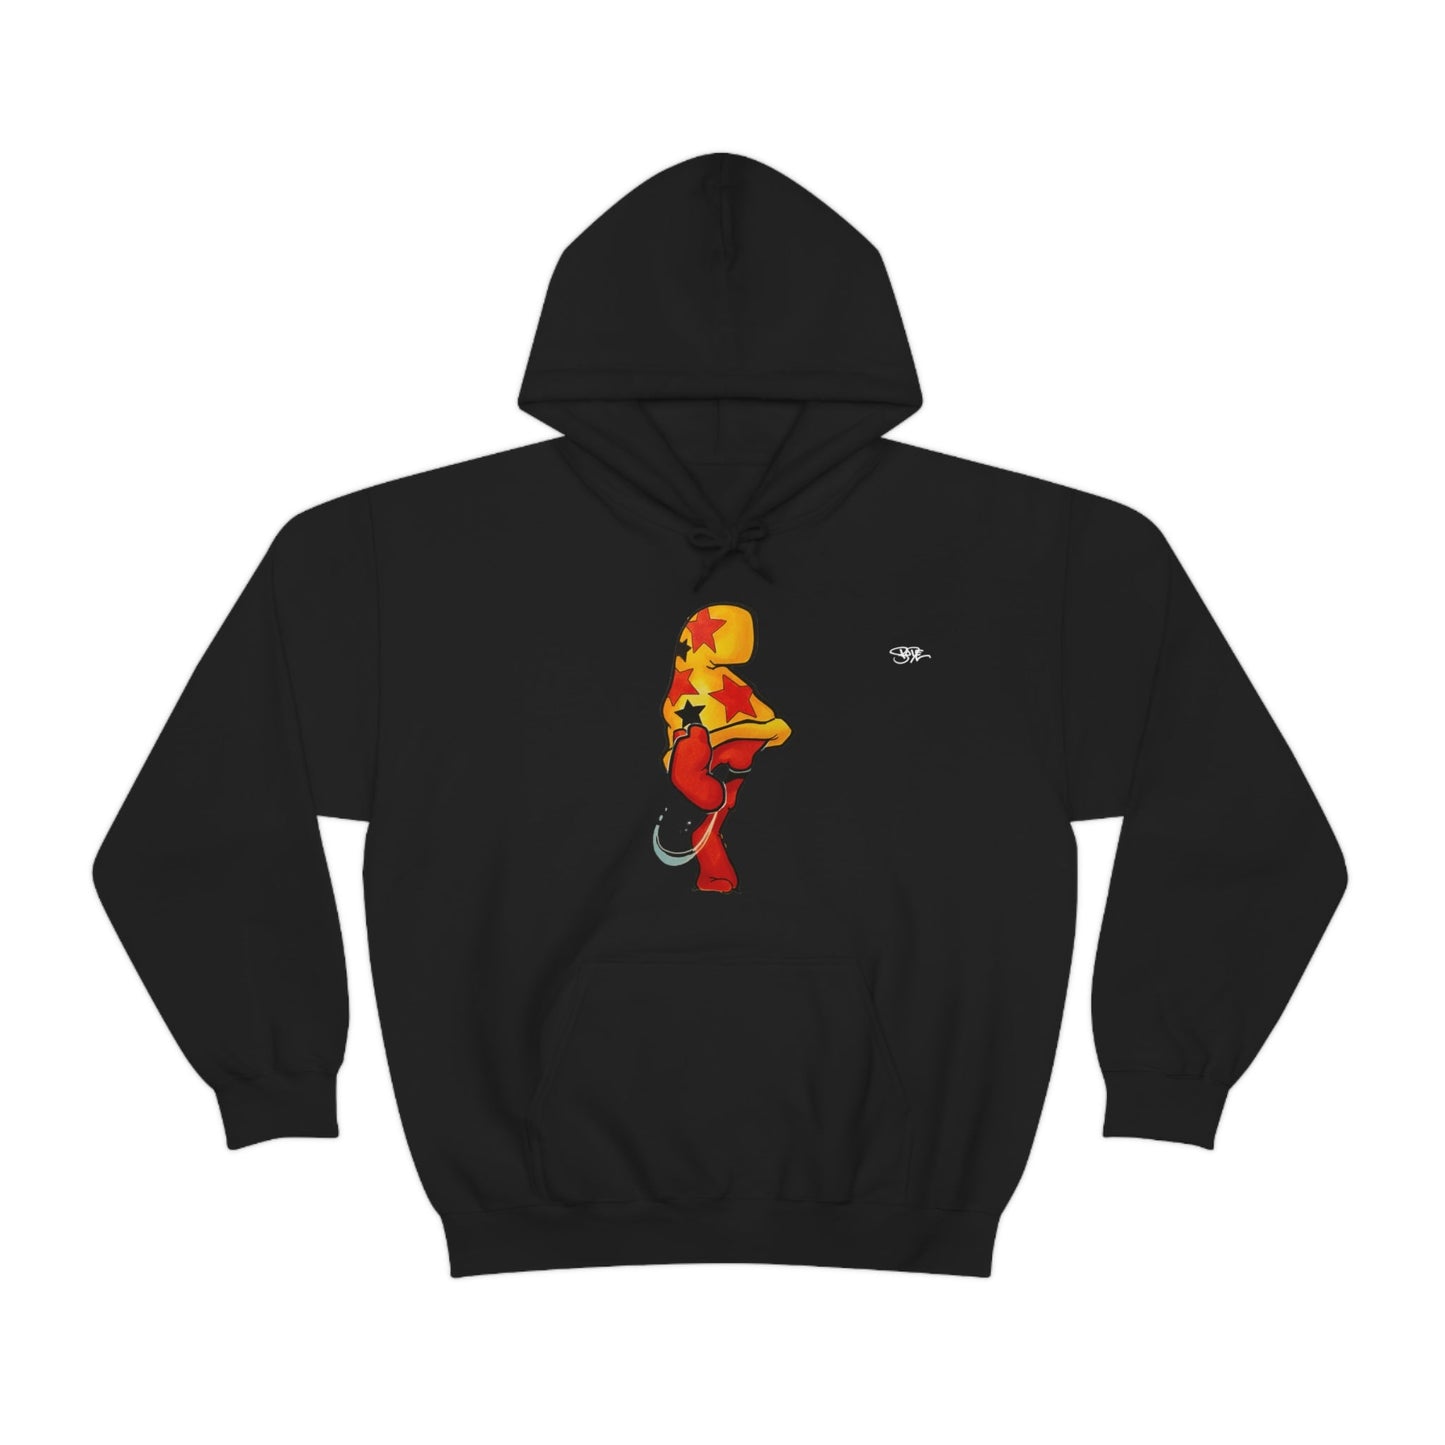 Bode Creed "Classic Cheech Drawing" Limited Edition 2-Sided Hoodie Black